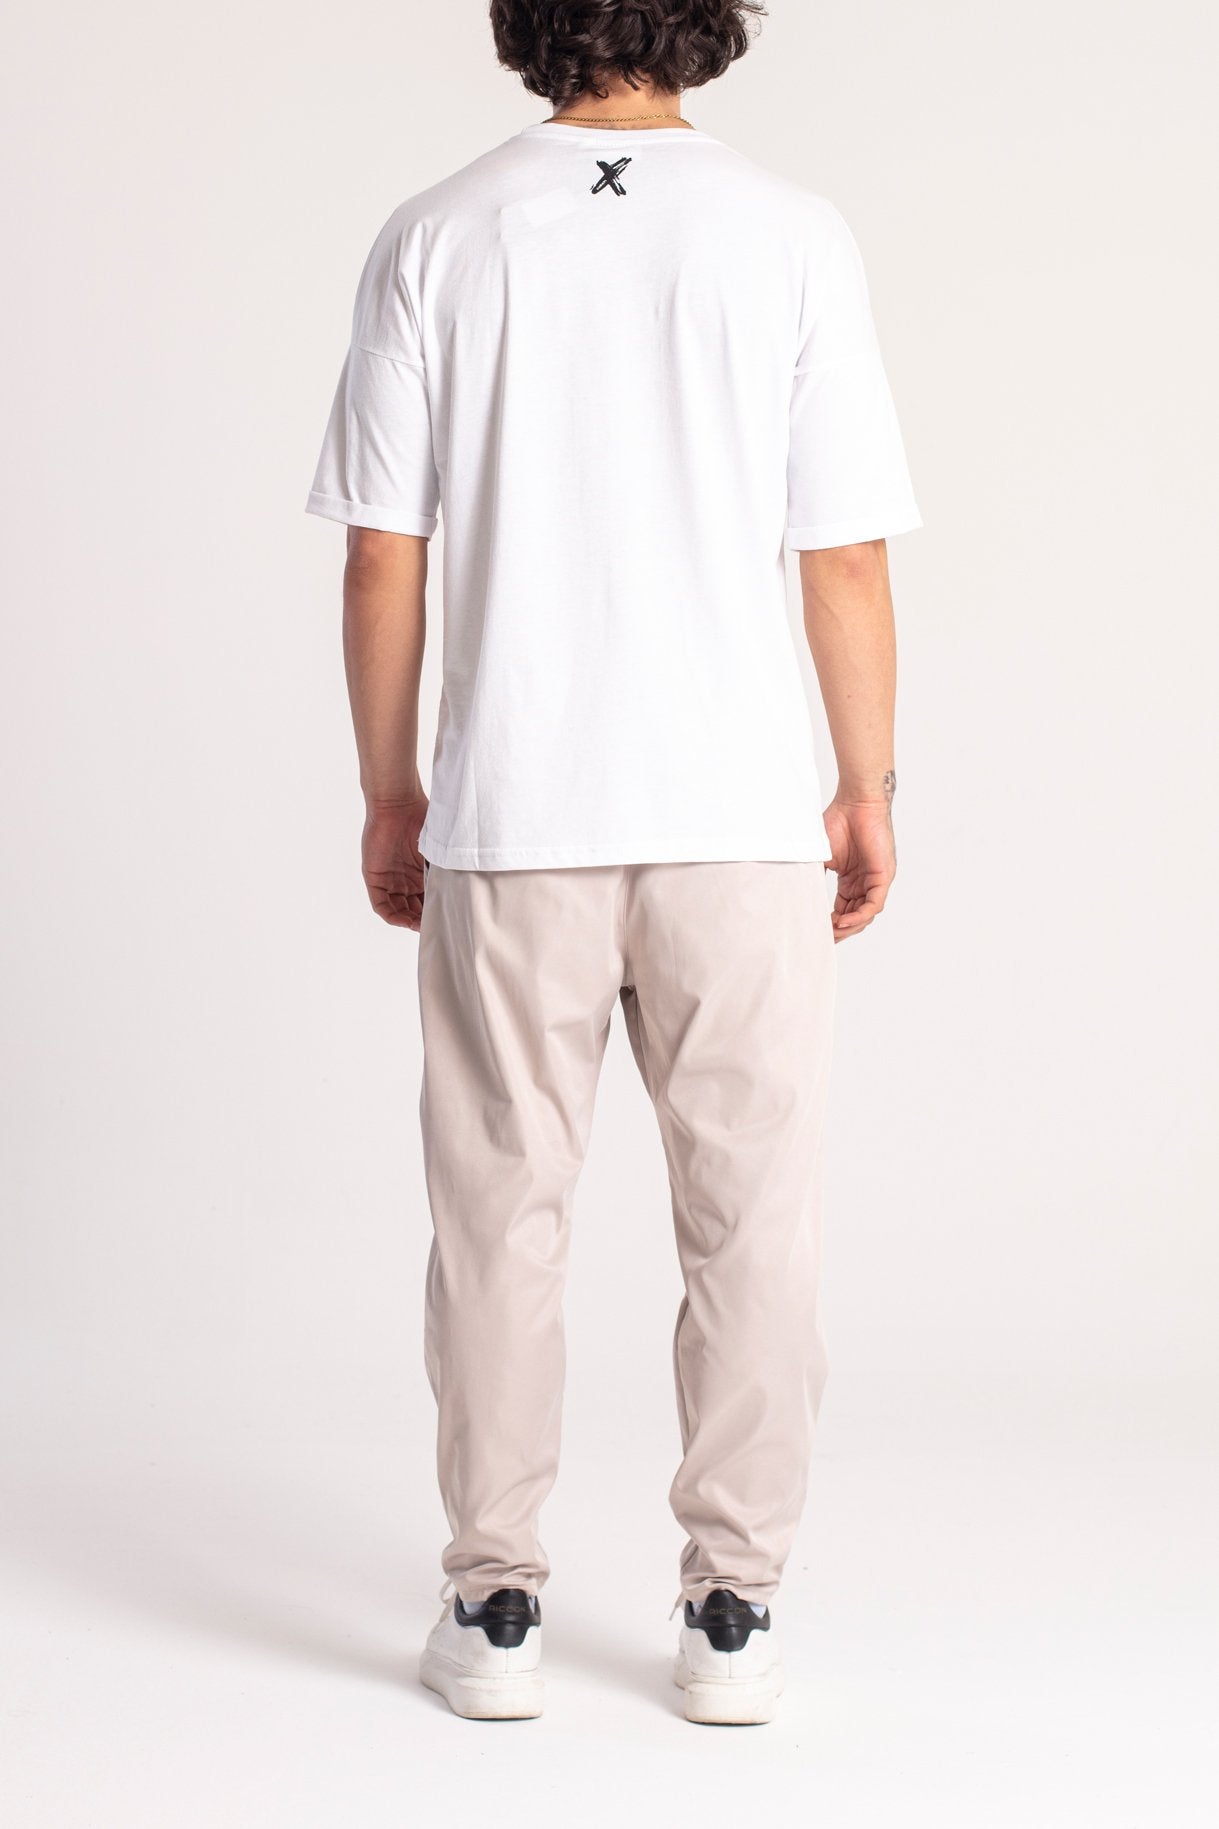 T-SHIRT OVERSIZE - GET THE HARMONY - COLORE BIANCO